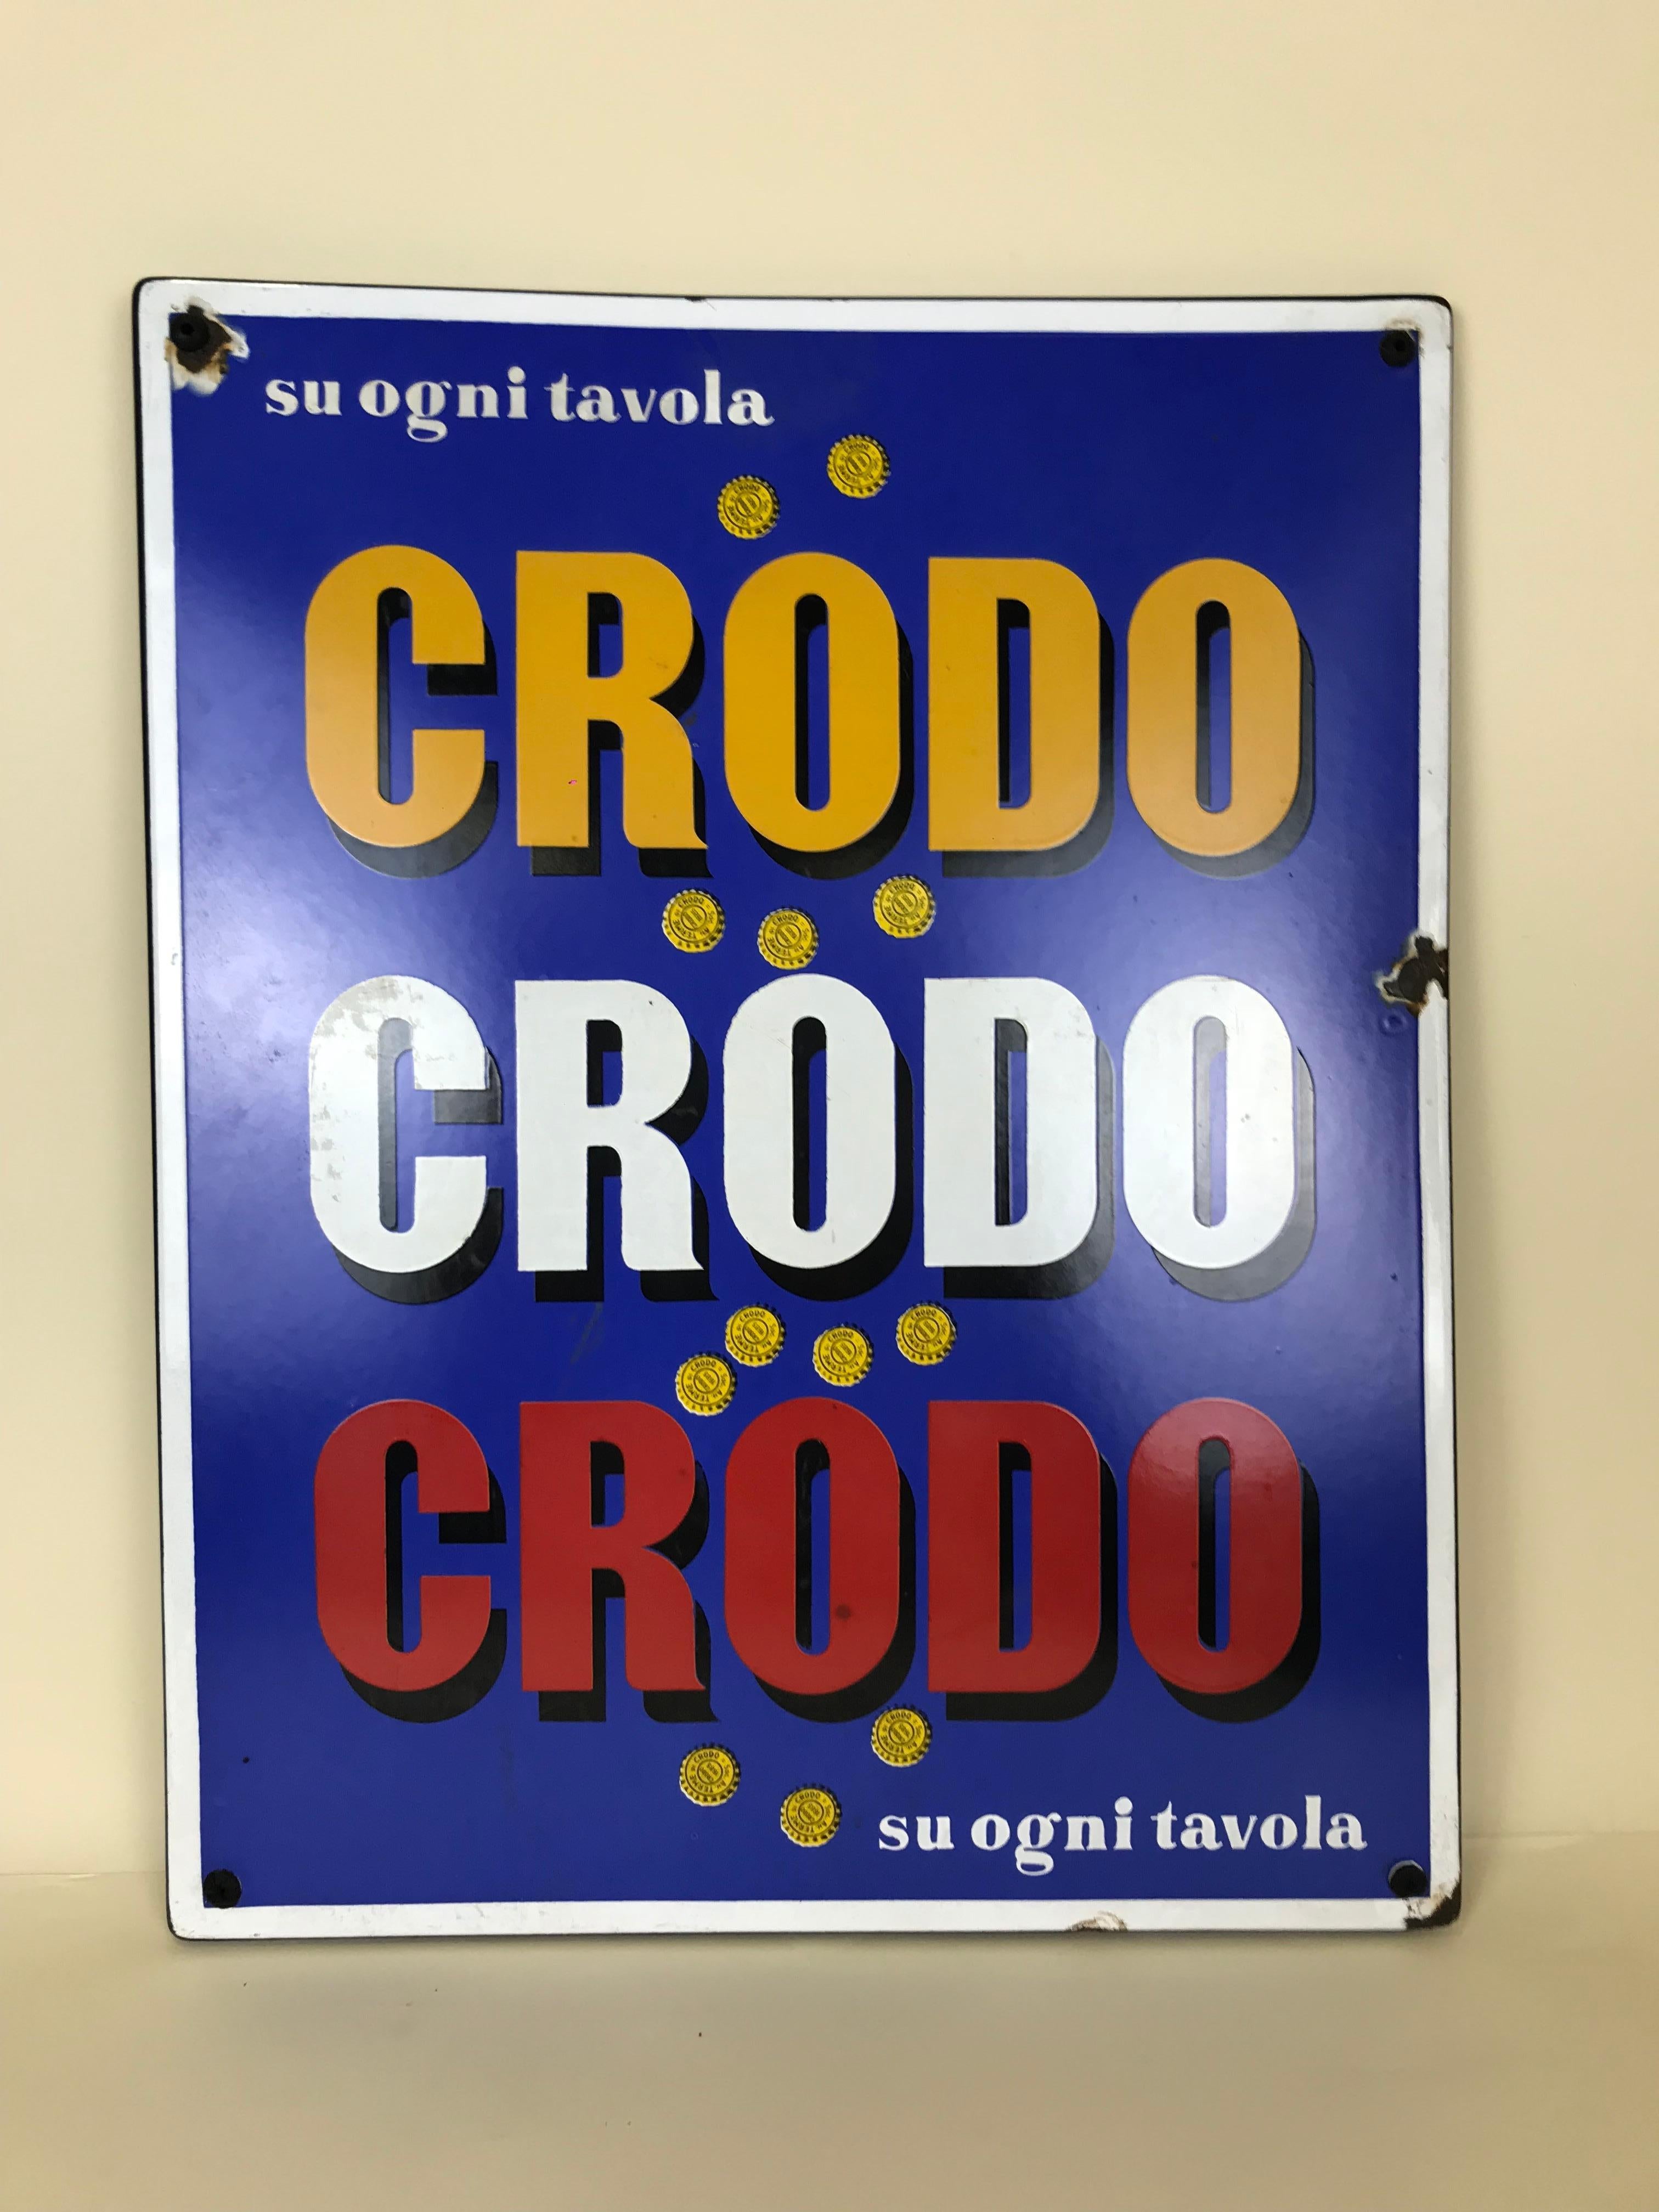 Vintage rectangular metal enamel mineral water Crodo sign produced for advertising purposes by Smalterie Lombarde in Italy in the 1960s.
Yellow, White and Red Crodo logo on blue background and slogan 